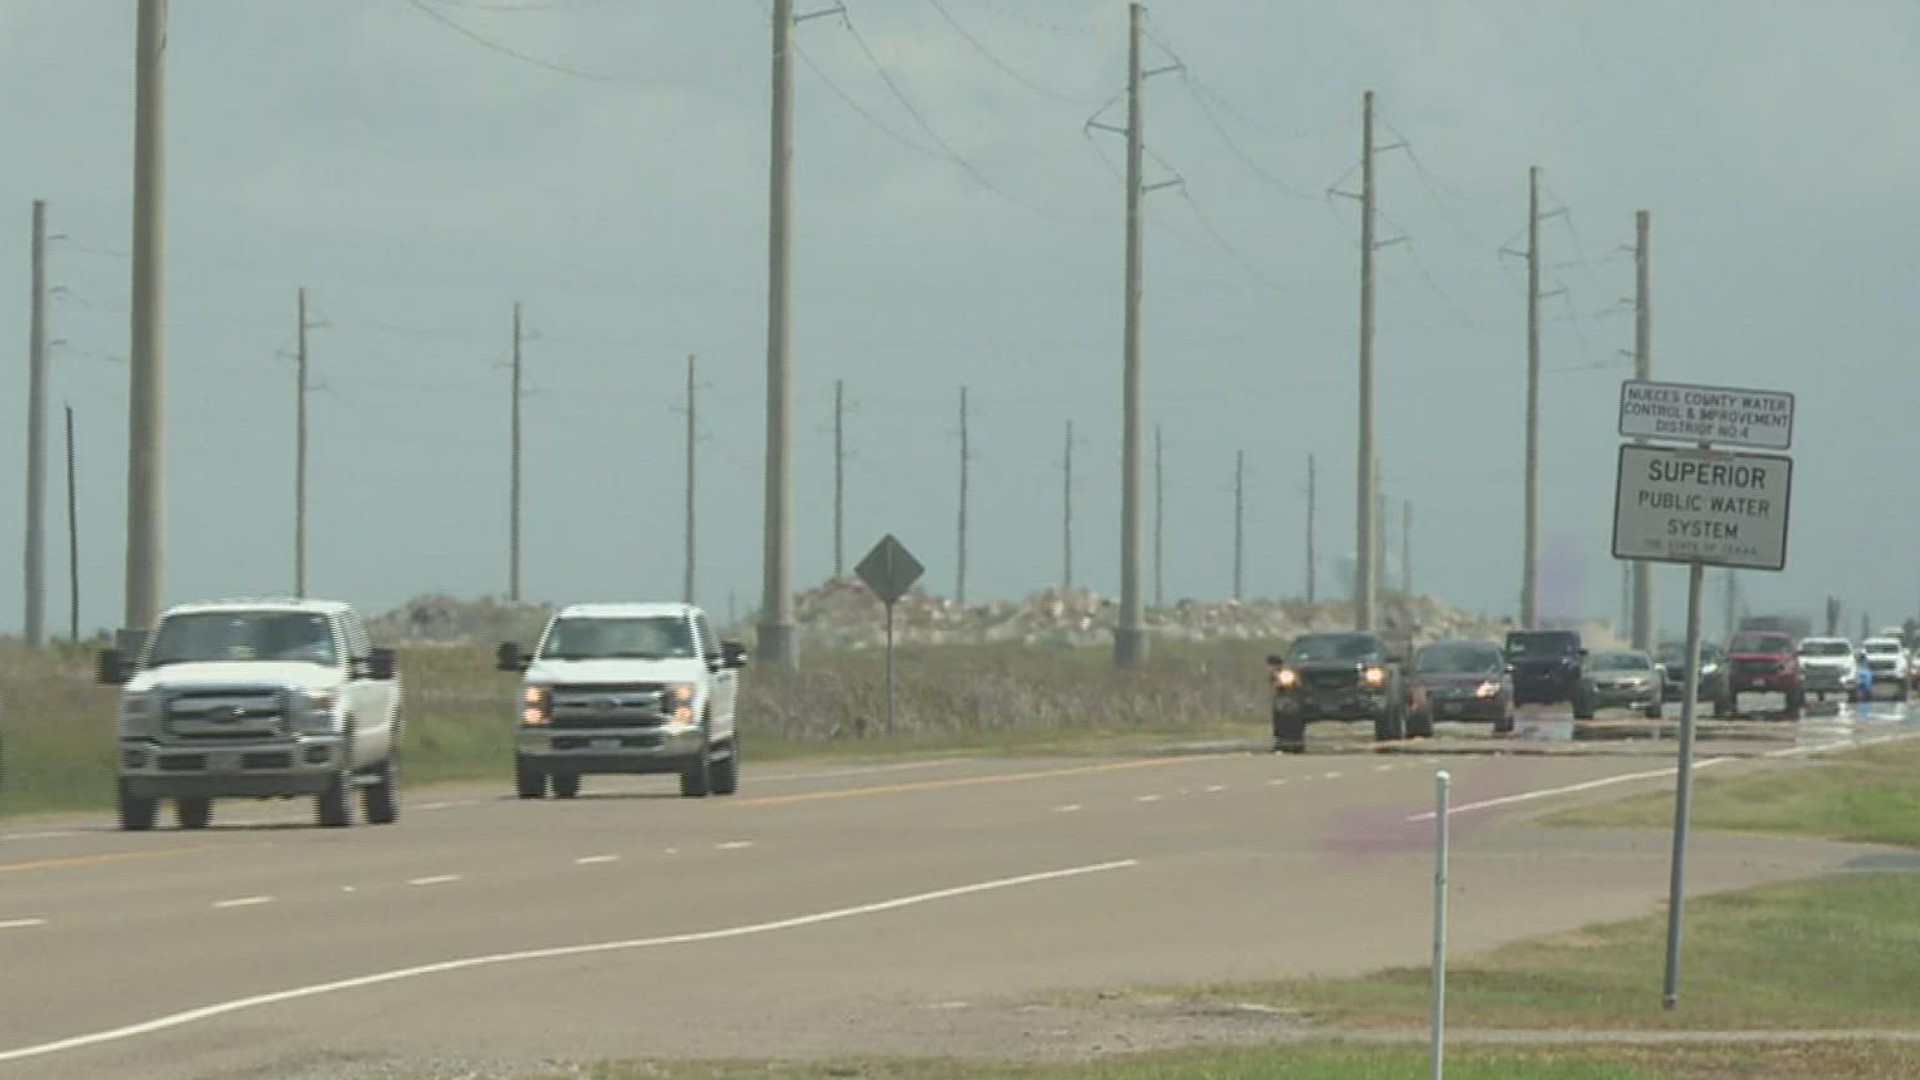 Corpus Christi Fire Department Battalion Chief Daniel Valdez said the new road will significantly help when responding to emergencies.